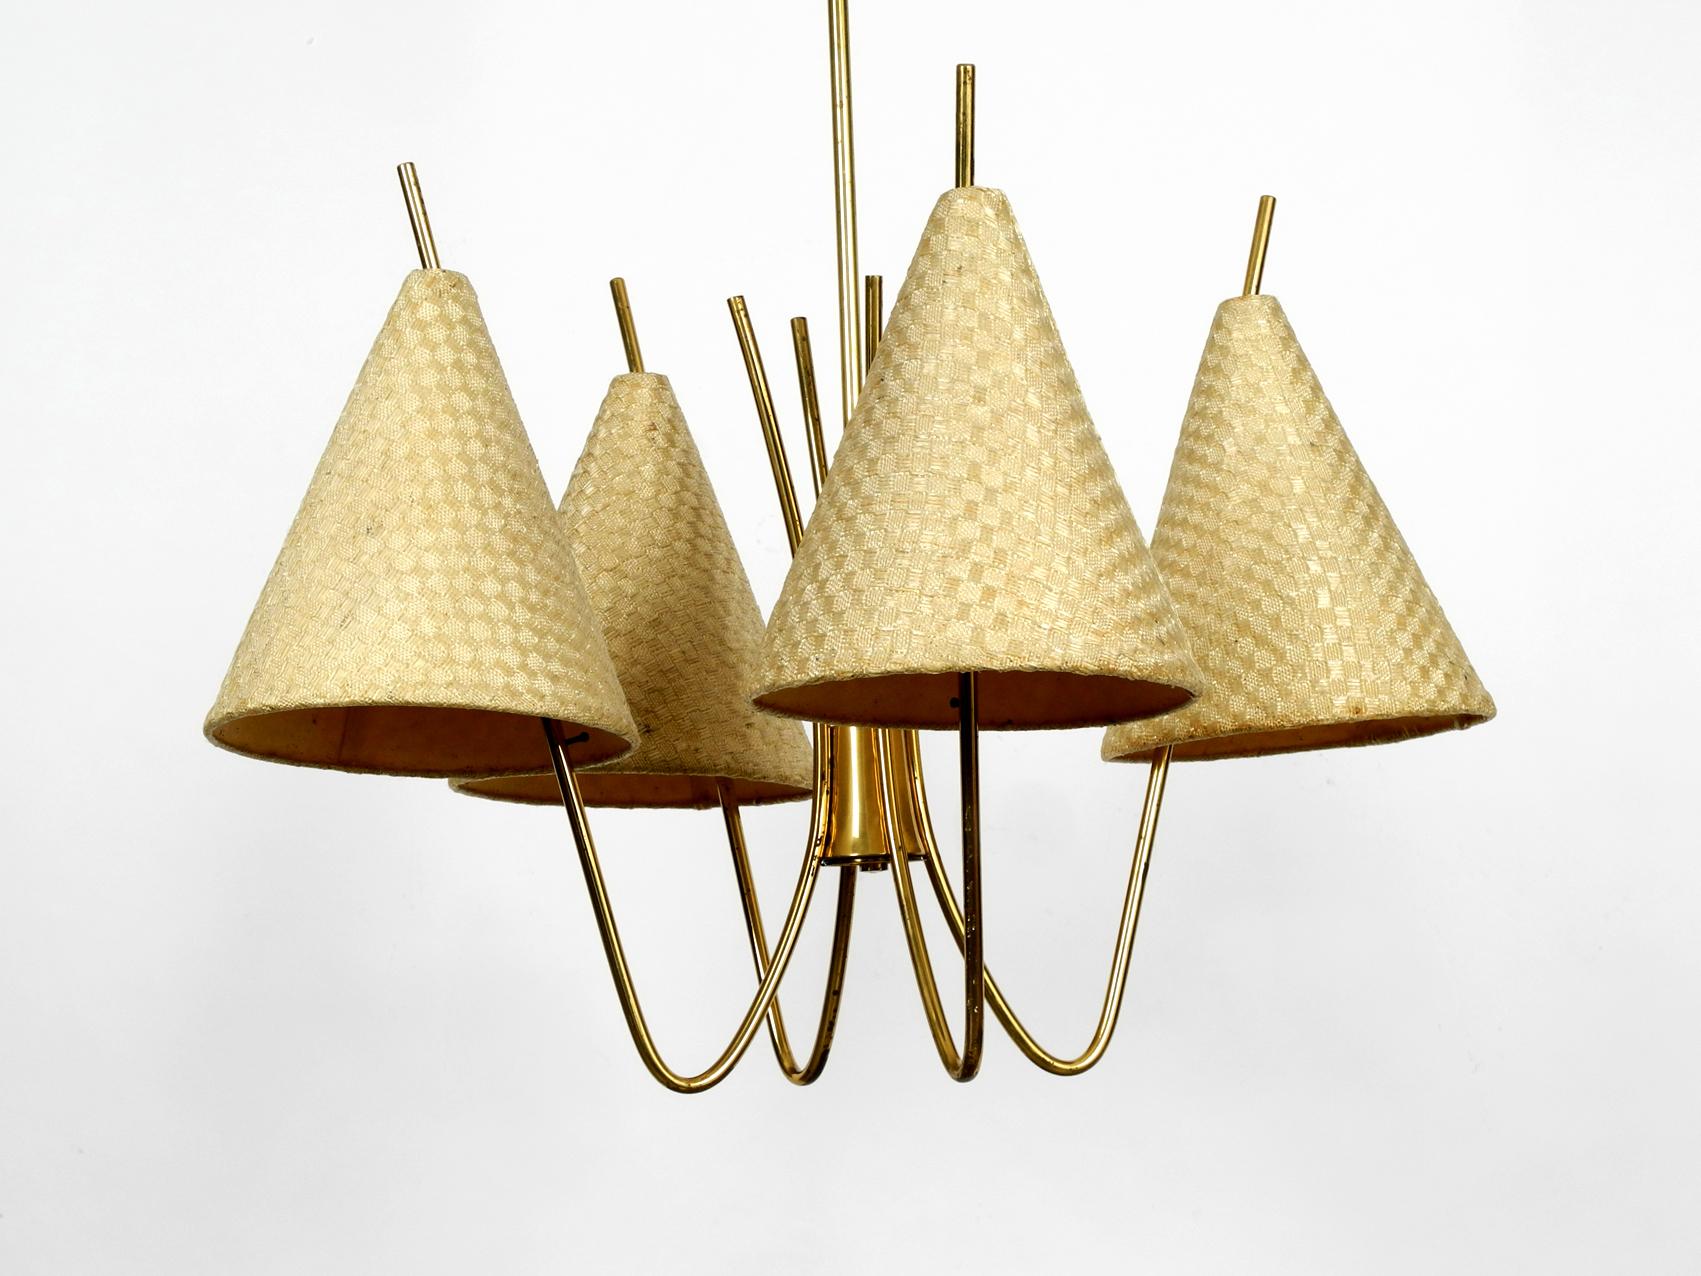 Austrian 1960s Brass Ceiling Lamp with Bast Shades by J. T. Kalmar Made in Austria